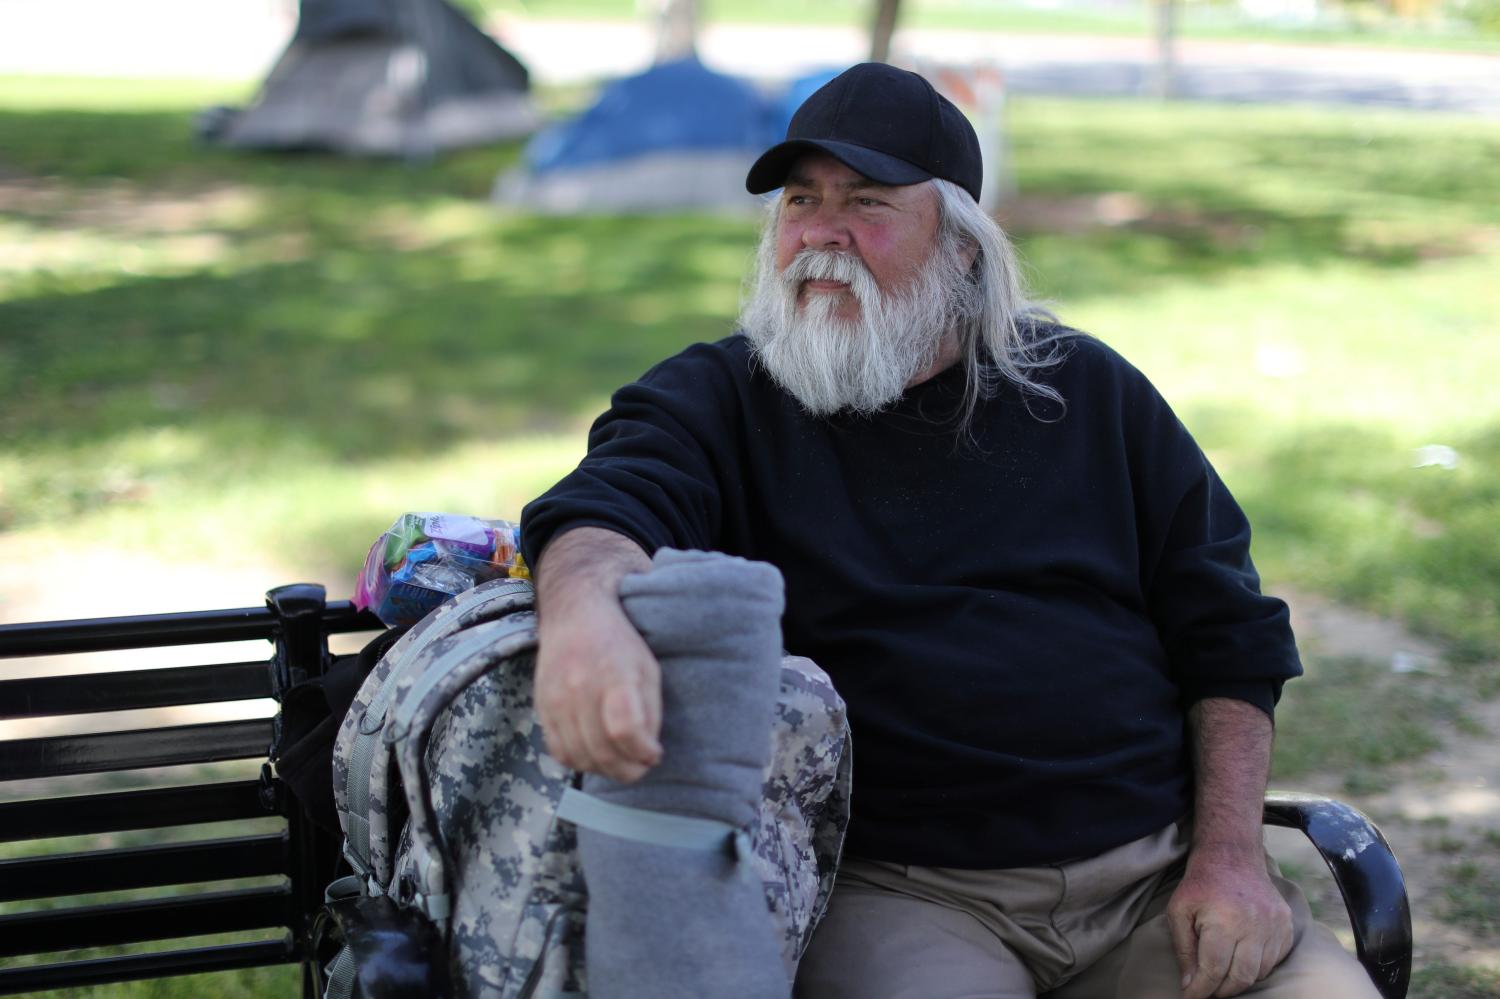 Fernando Ochoa, 65, who has been homeless for a week, sits on a park bench in Los Angeles, California, U.S. April 11, 2018. Ochoa said he had worked as a foreman for Albertson's and a Service Advisor for Honda but is now retired and is looking for housing. Picture taken April 11, 2018. REUTERS/Lucy Nicholson - RC1B16E55500